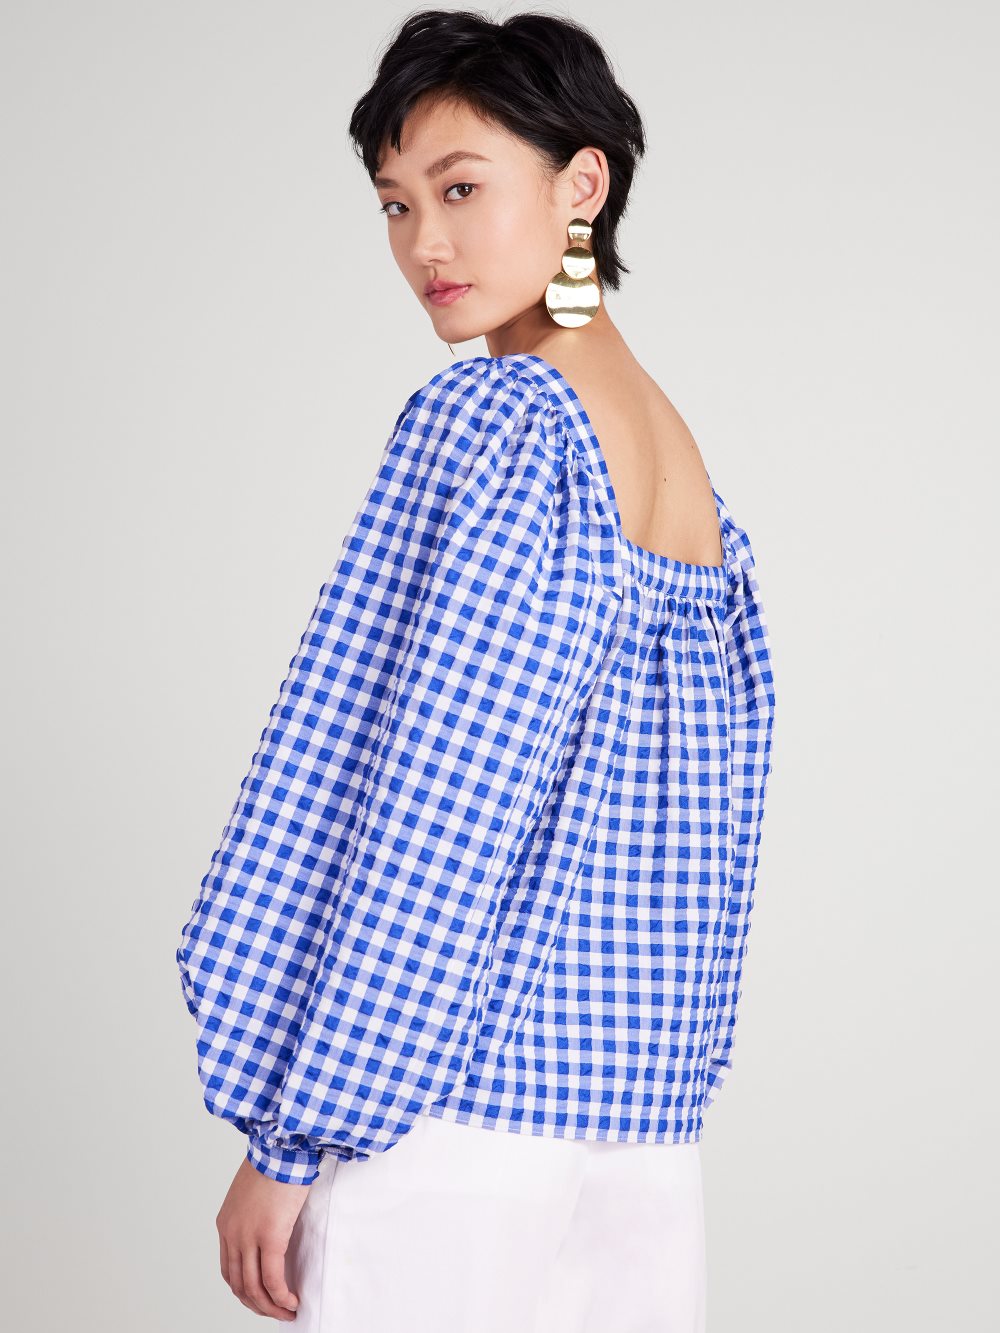 Women's blueberry gingham square-neck top | Kate Spade